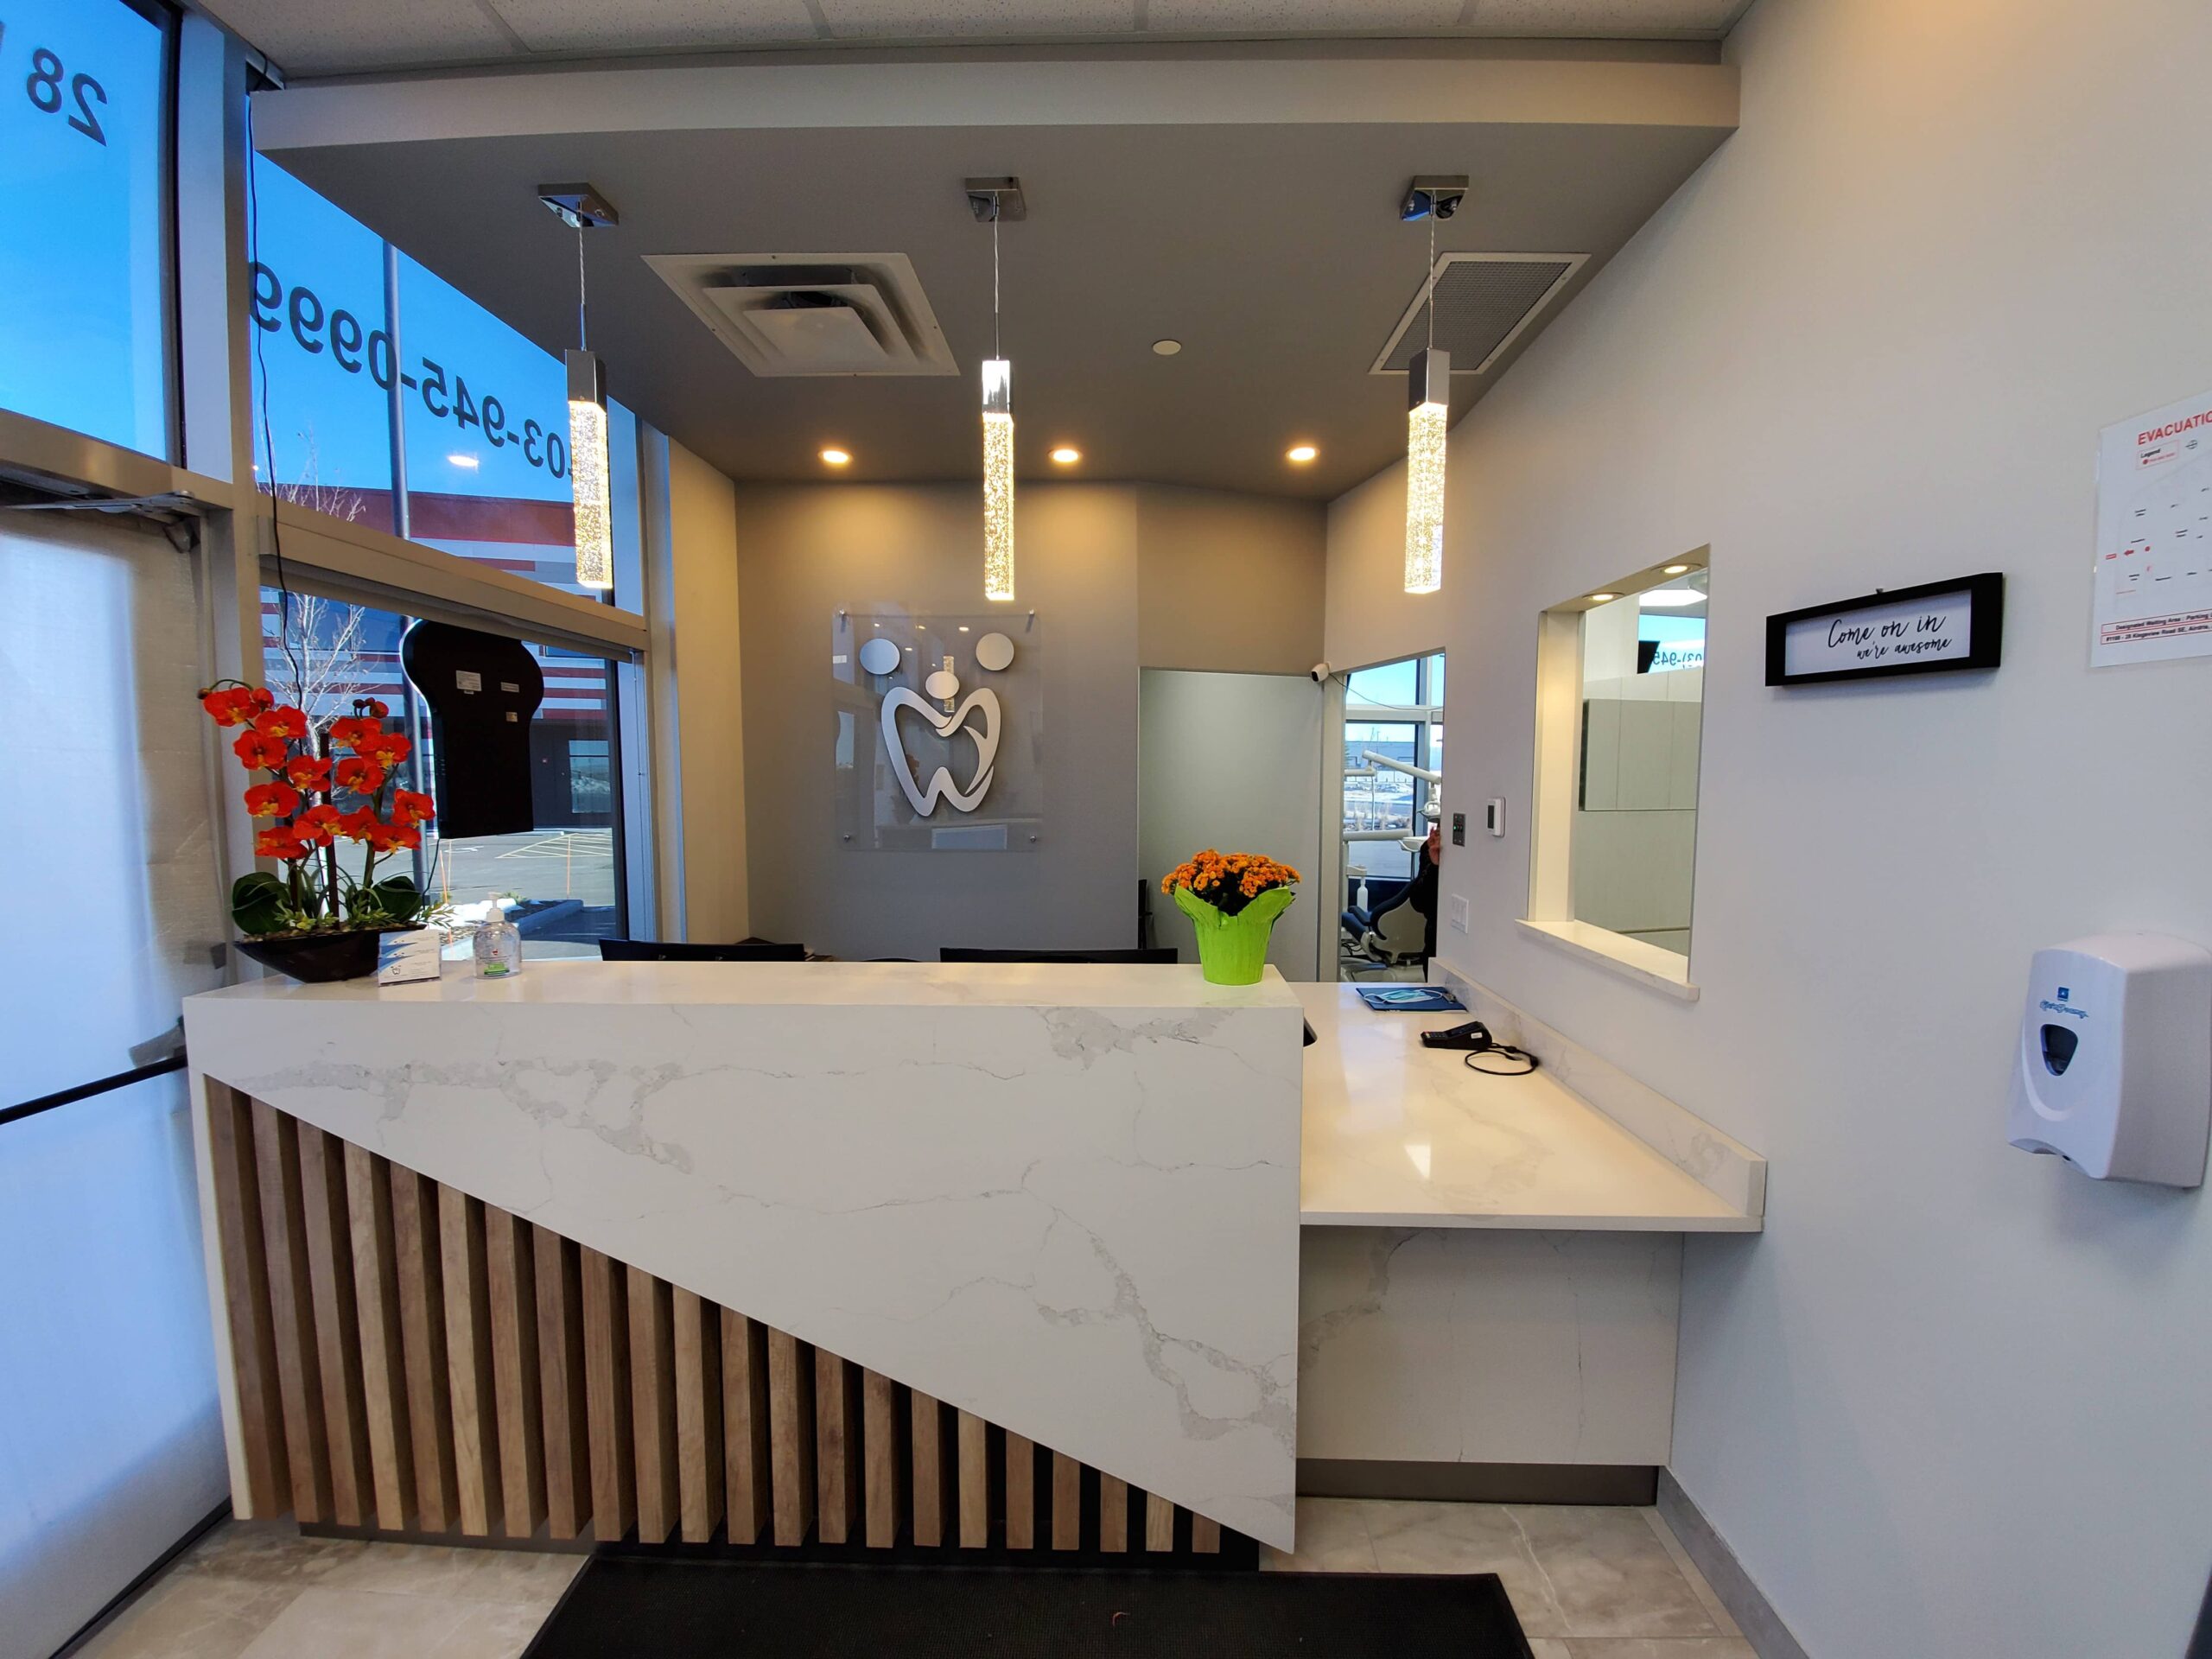 Reception Area at Kingspointe Dental Centre